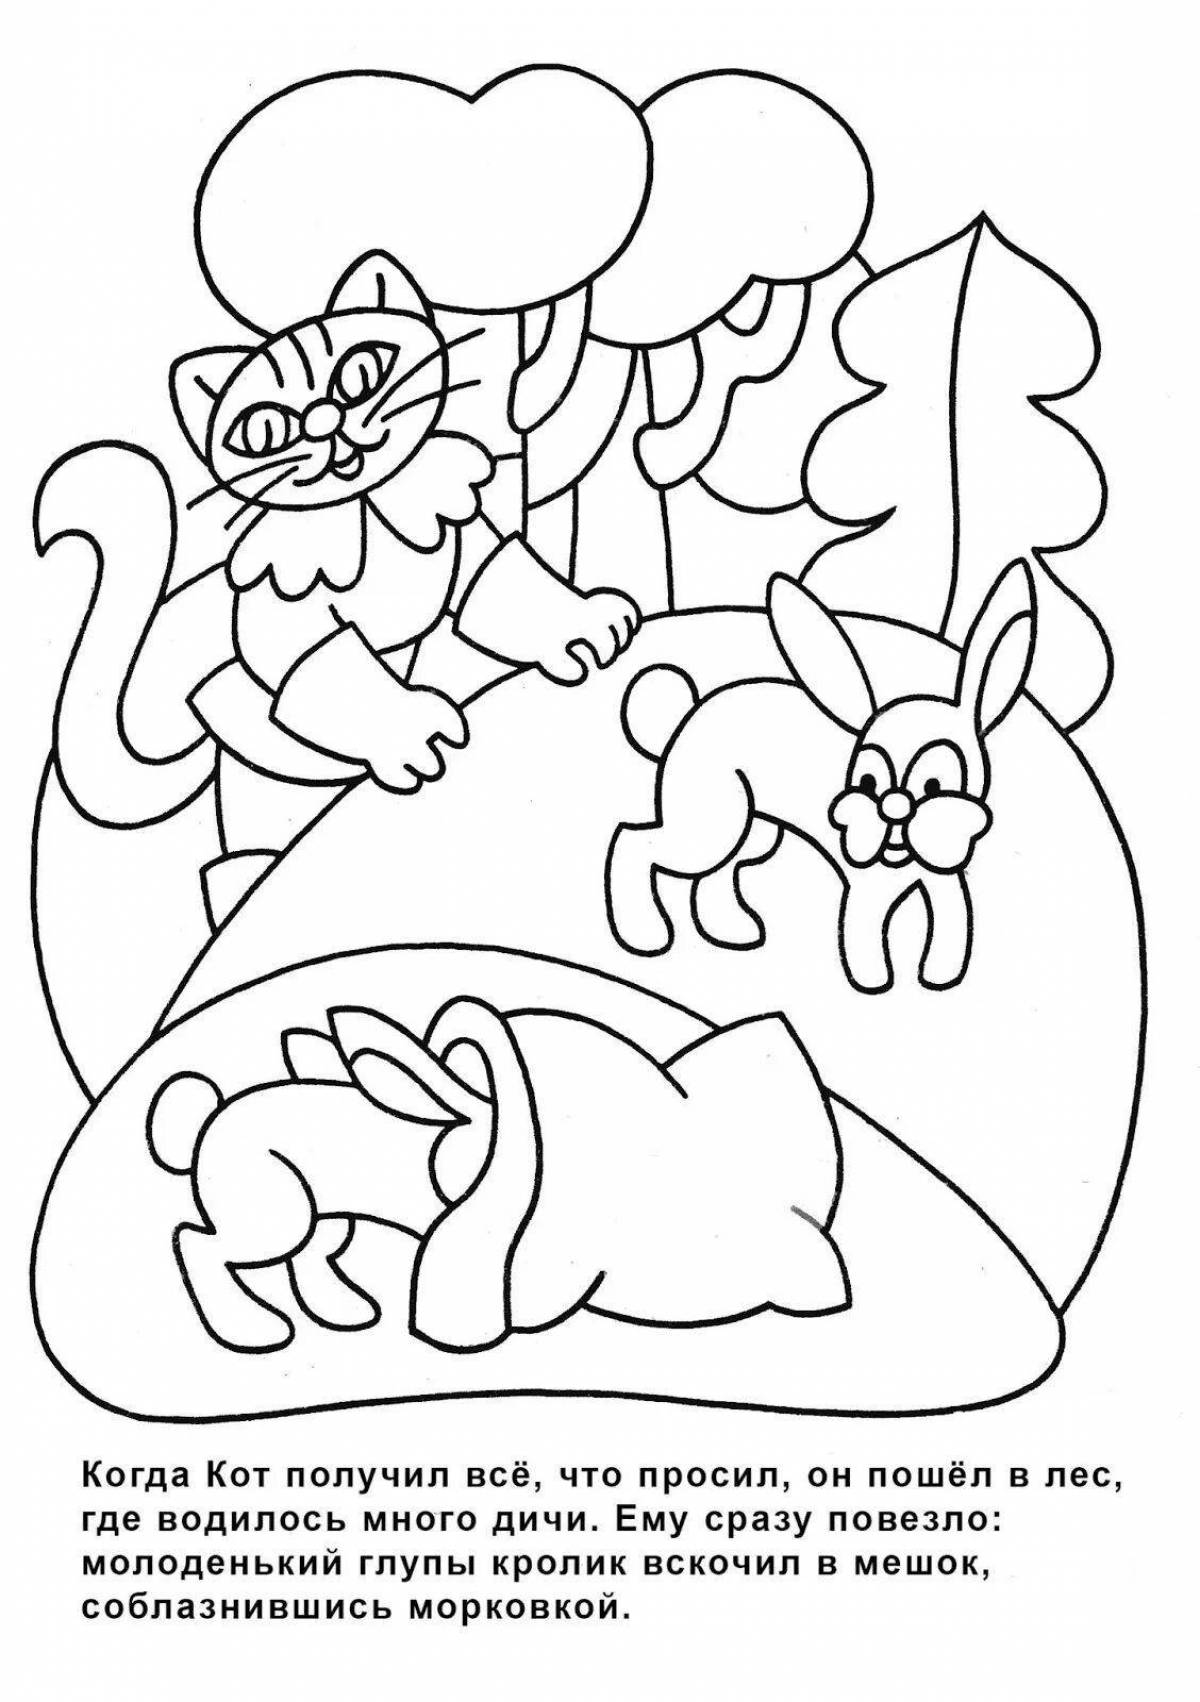 Sh perro playful coloring page